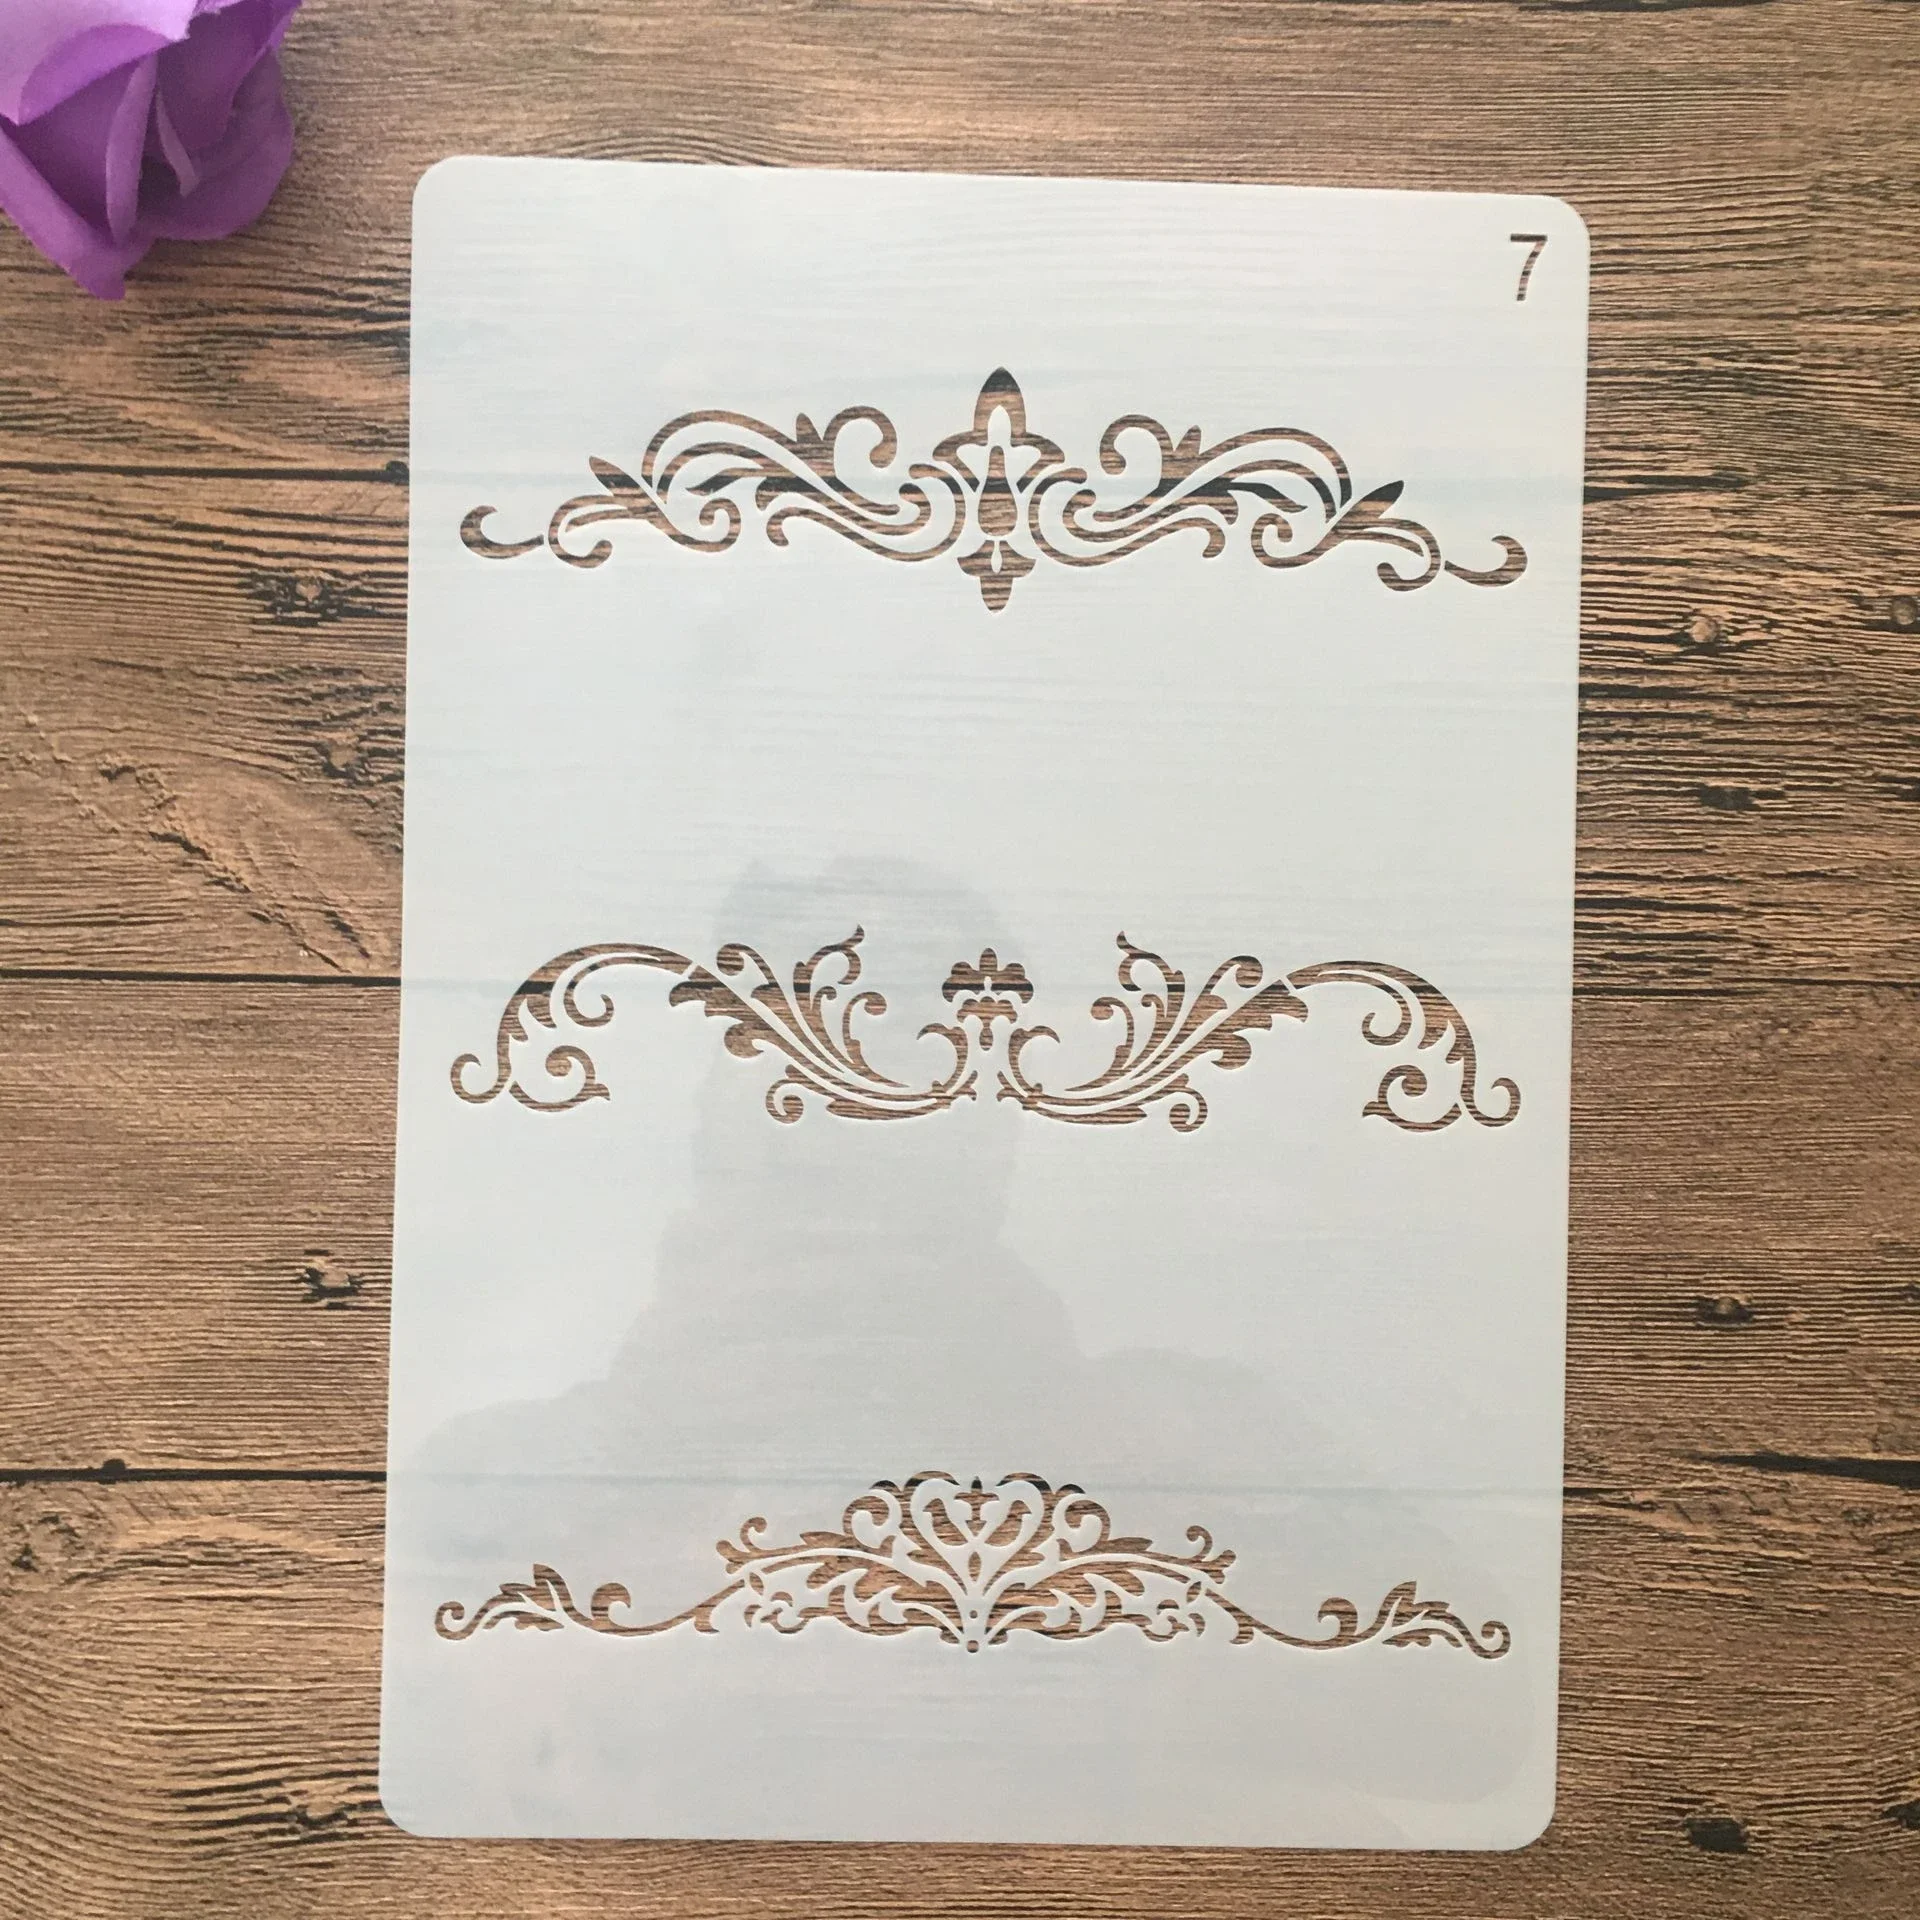 A4 29 * 21cm Crown Flower wall layered stencil painting scrapbook stamp album decoration embossed paper card template decoration 30 500pcs greeting tags thank you for your order kraft paper card shop gift decoration sticker wedding small business invitation